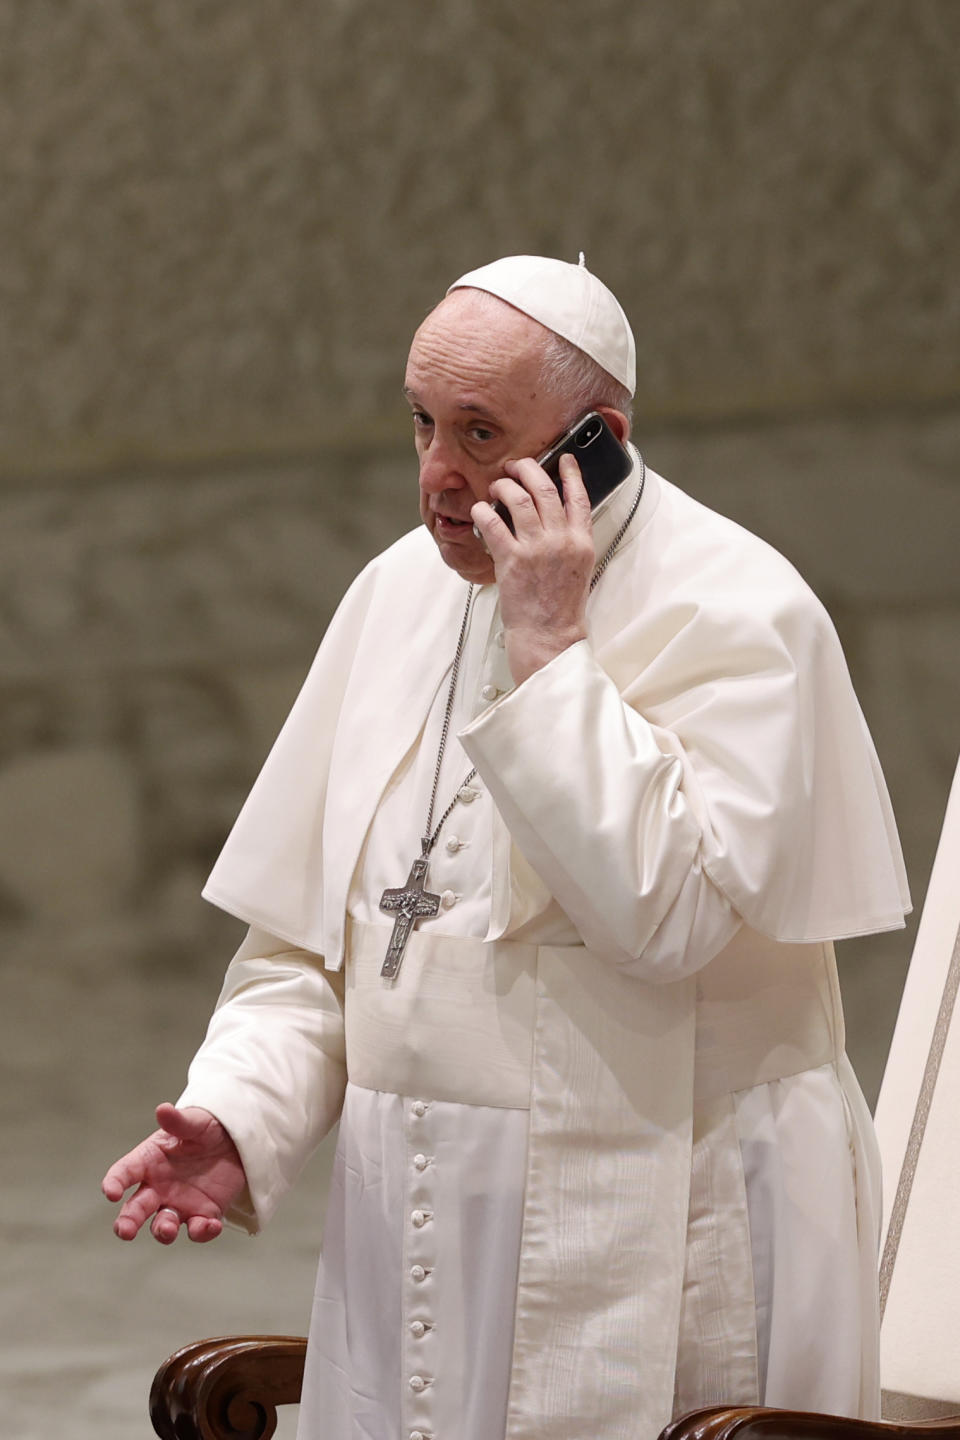 Pope Francis speaks on a cell phone, given to him by his aide Piergiorgio Zanetti, at the end of his weekly general audience in the Paul VI hall at the Vatican, Wednesday, Aug. 11, 2021. (AP Photo/Riccardo De Luca)